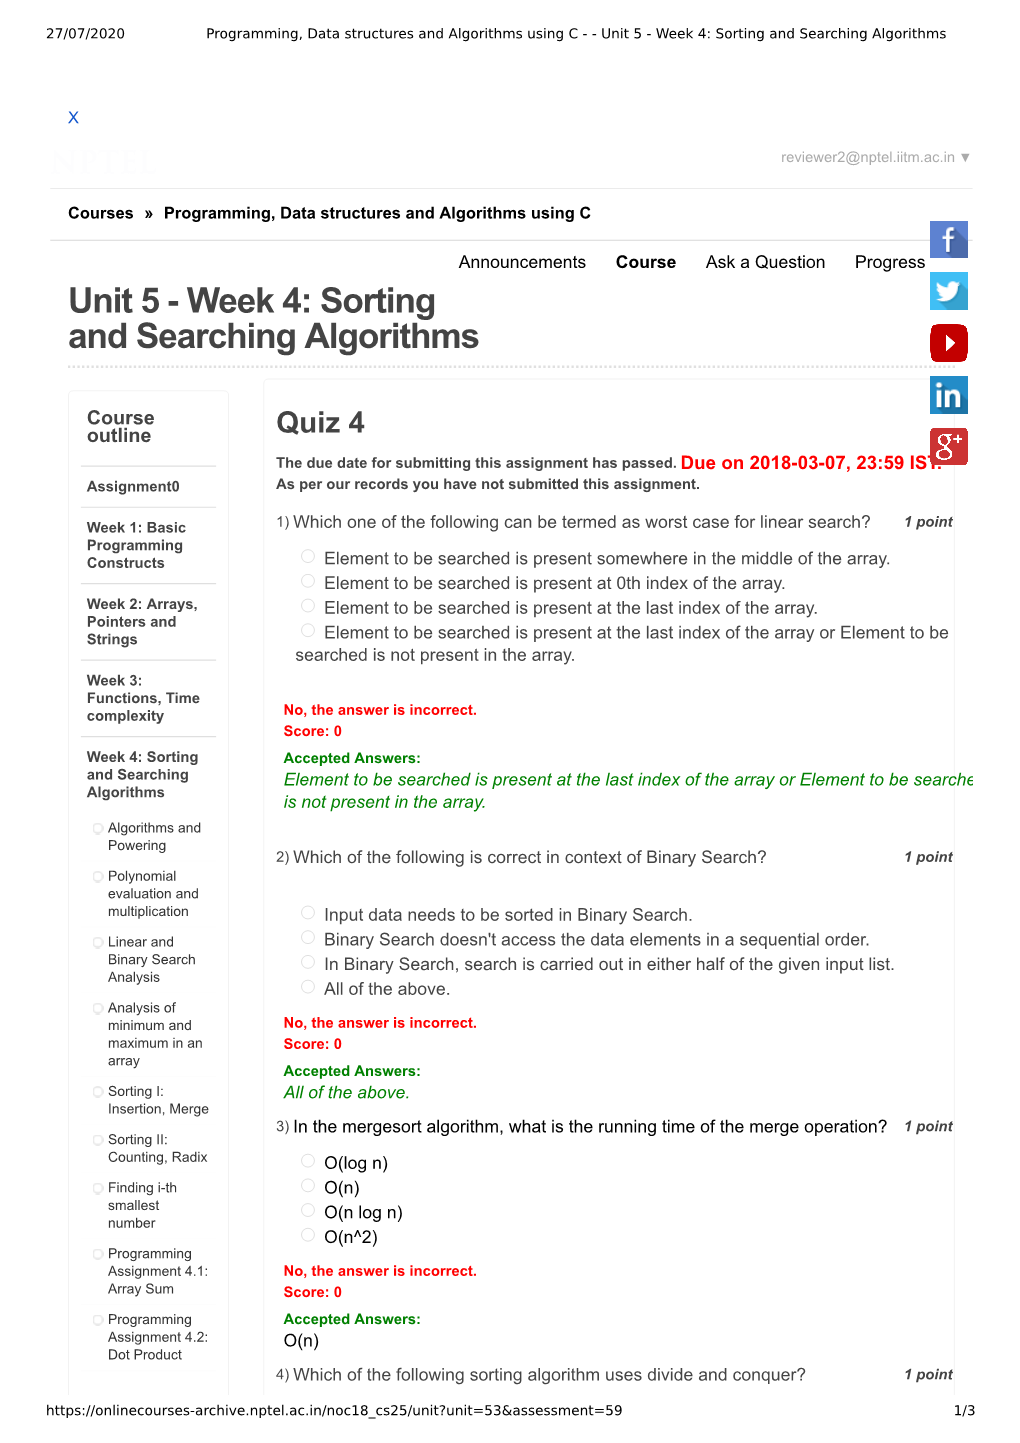 Unit 5 - Week 4: Sorting and Searching Algorithms